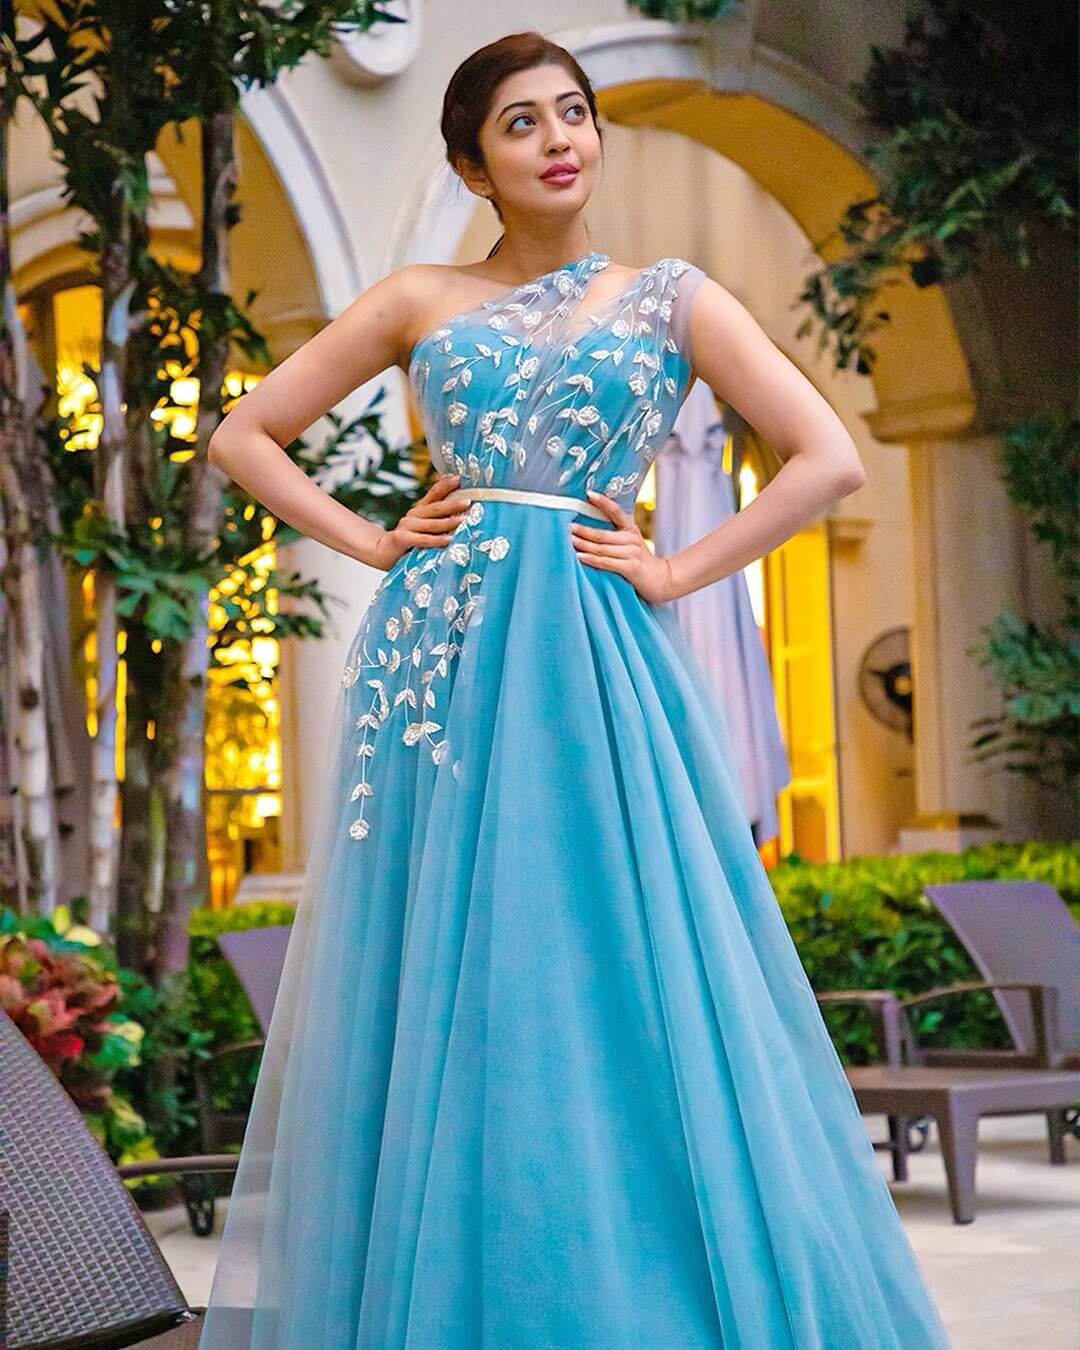 Pranitha Subhash Frozen Princess Inspired One Shoulder Maxi Dress Outfit Look gives us a Princess Vibes